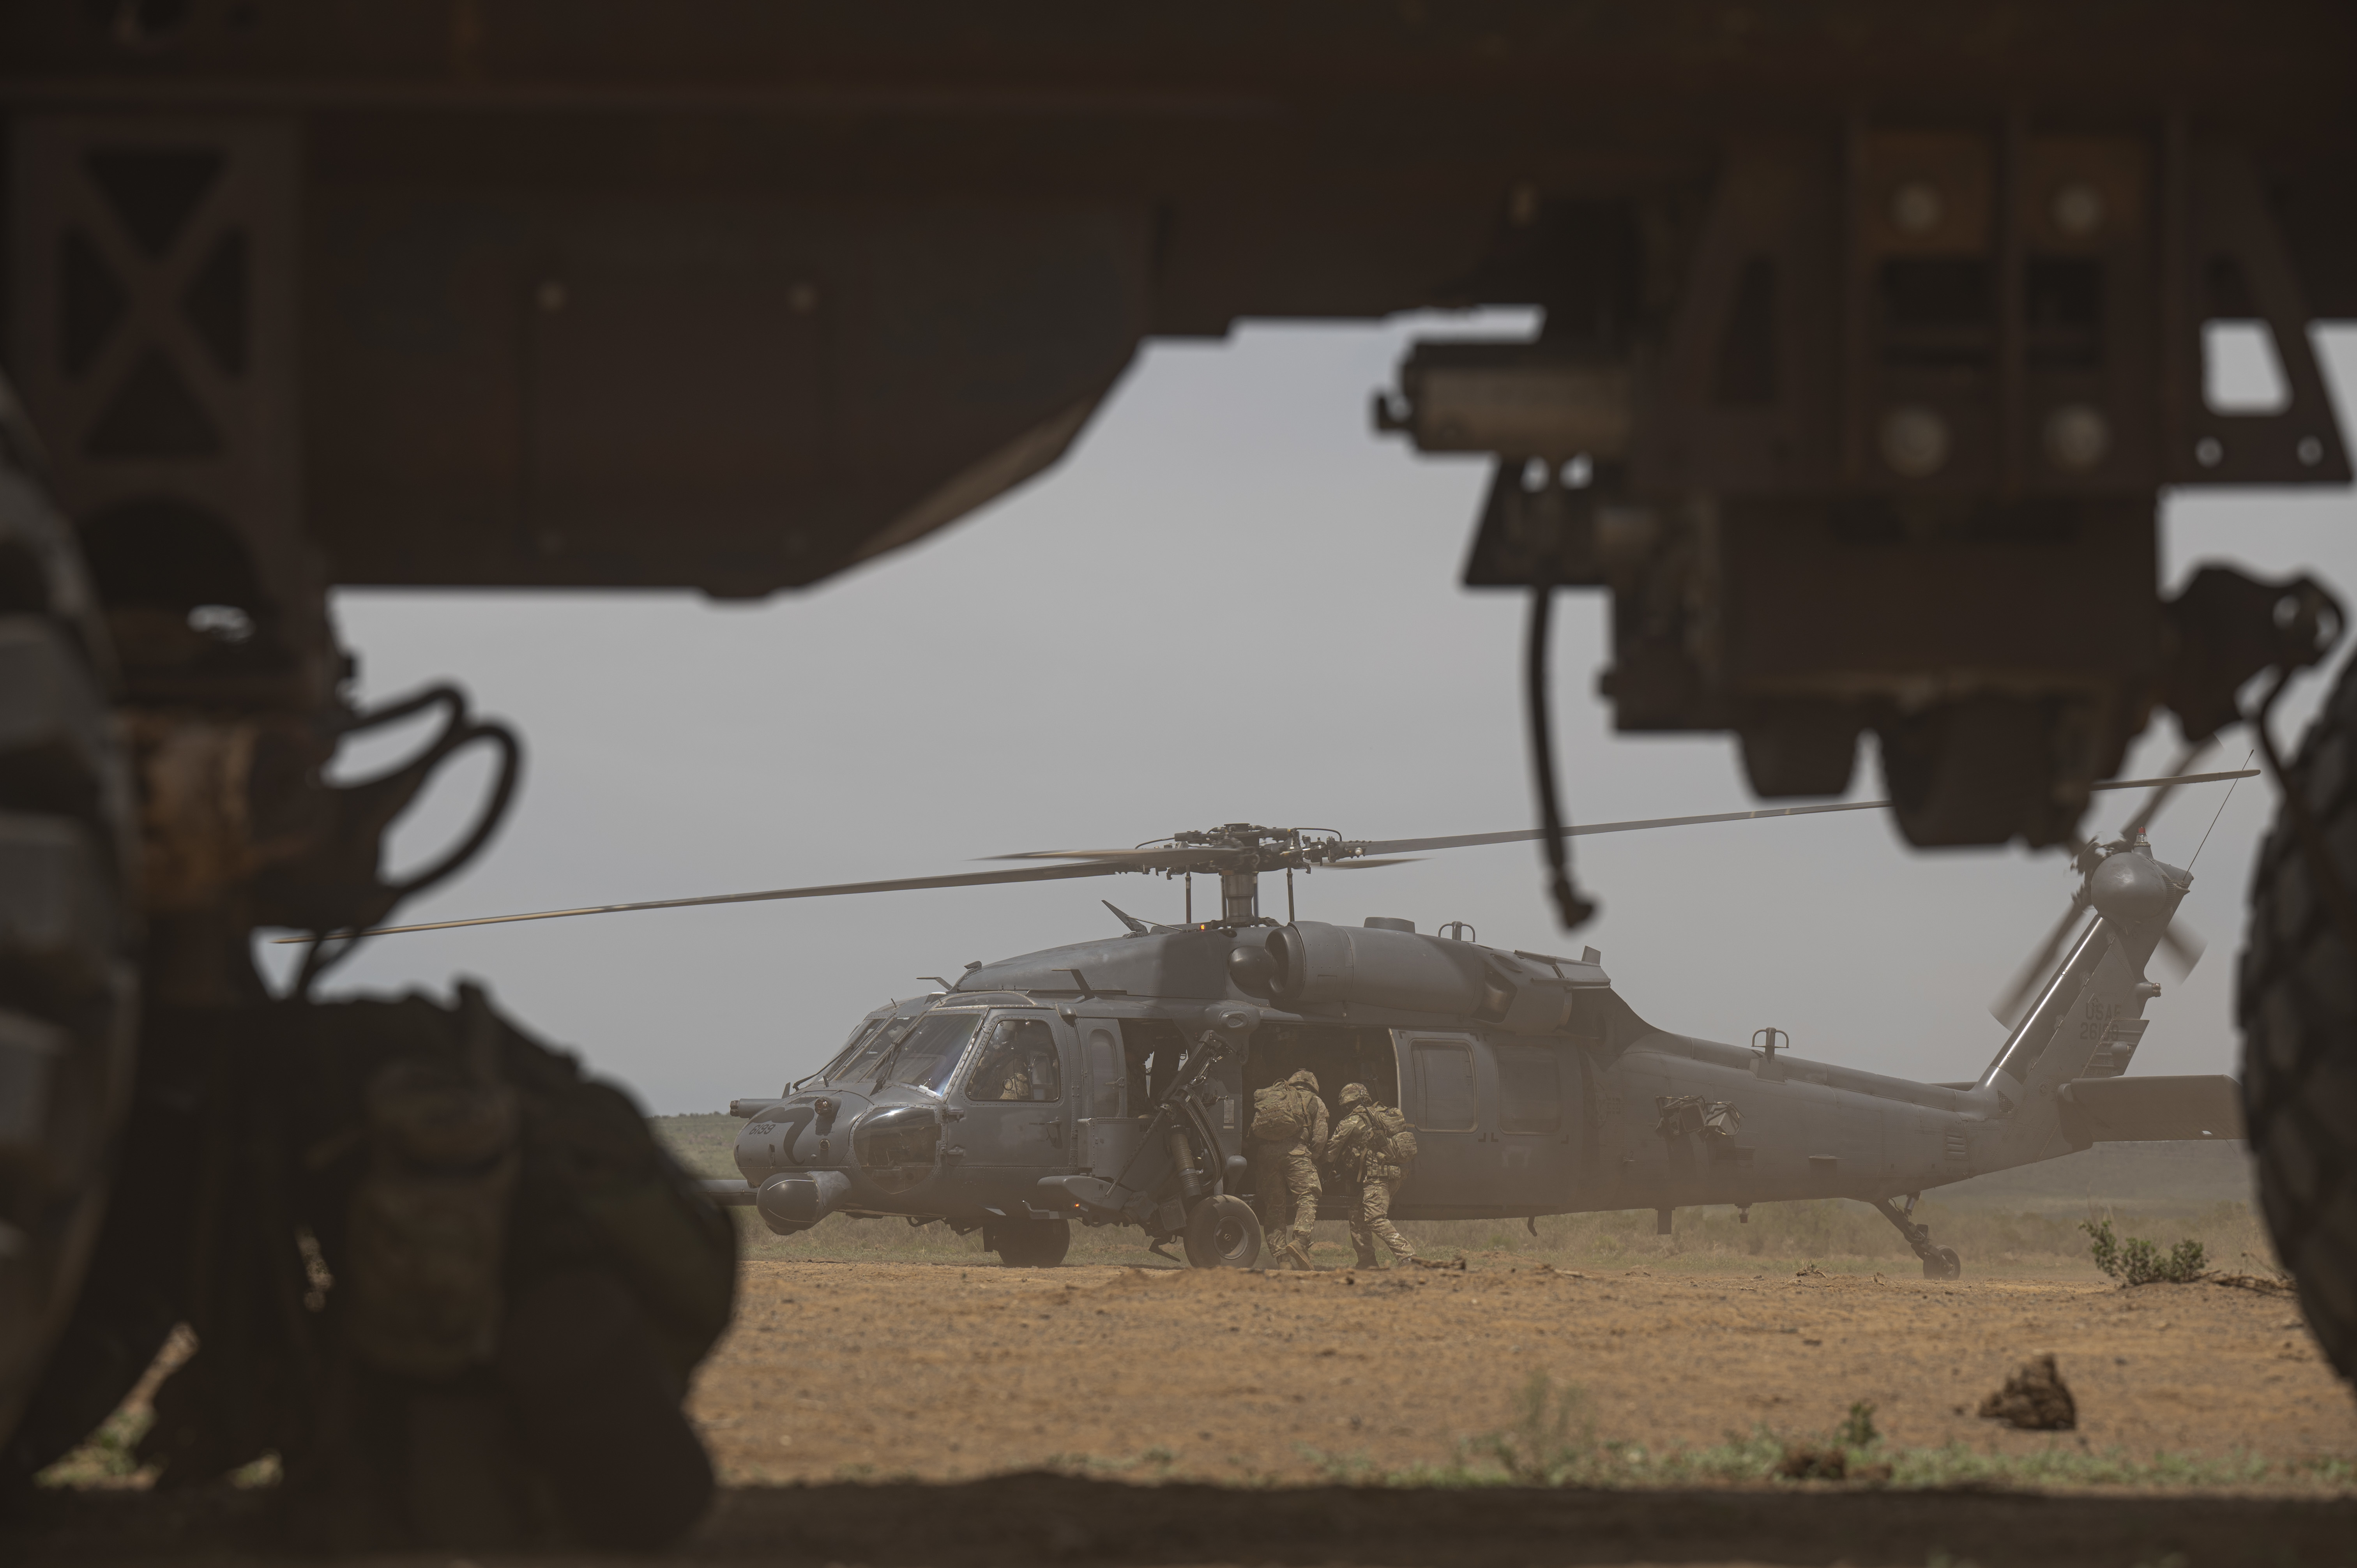 Image shows RAF Regiment boarding helicopter in the desert.